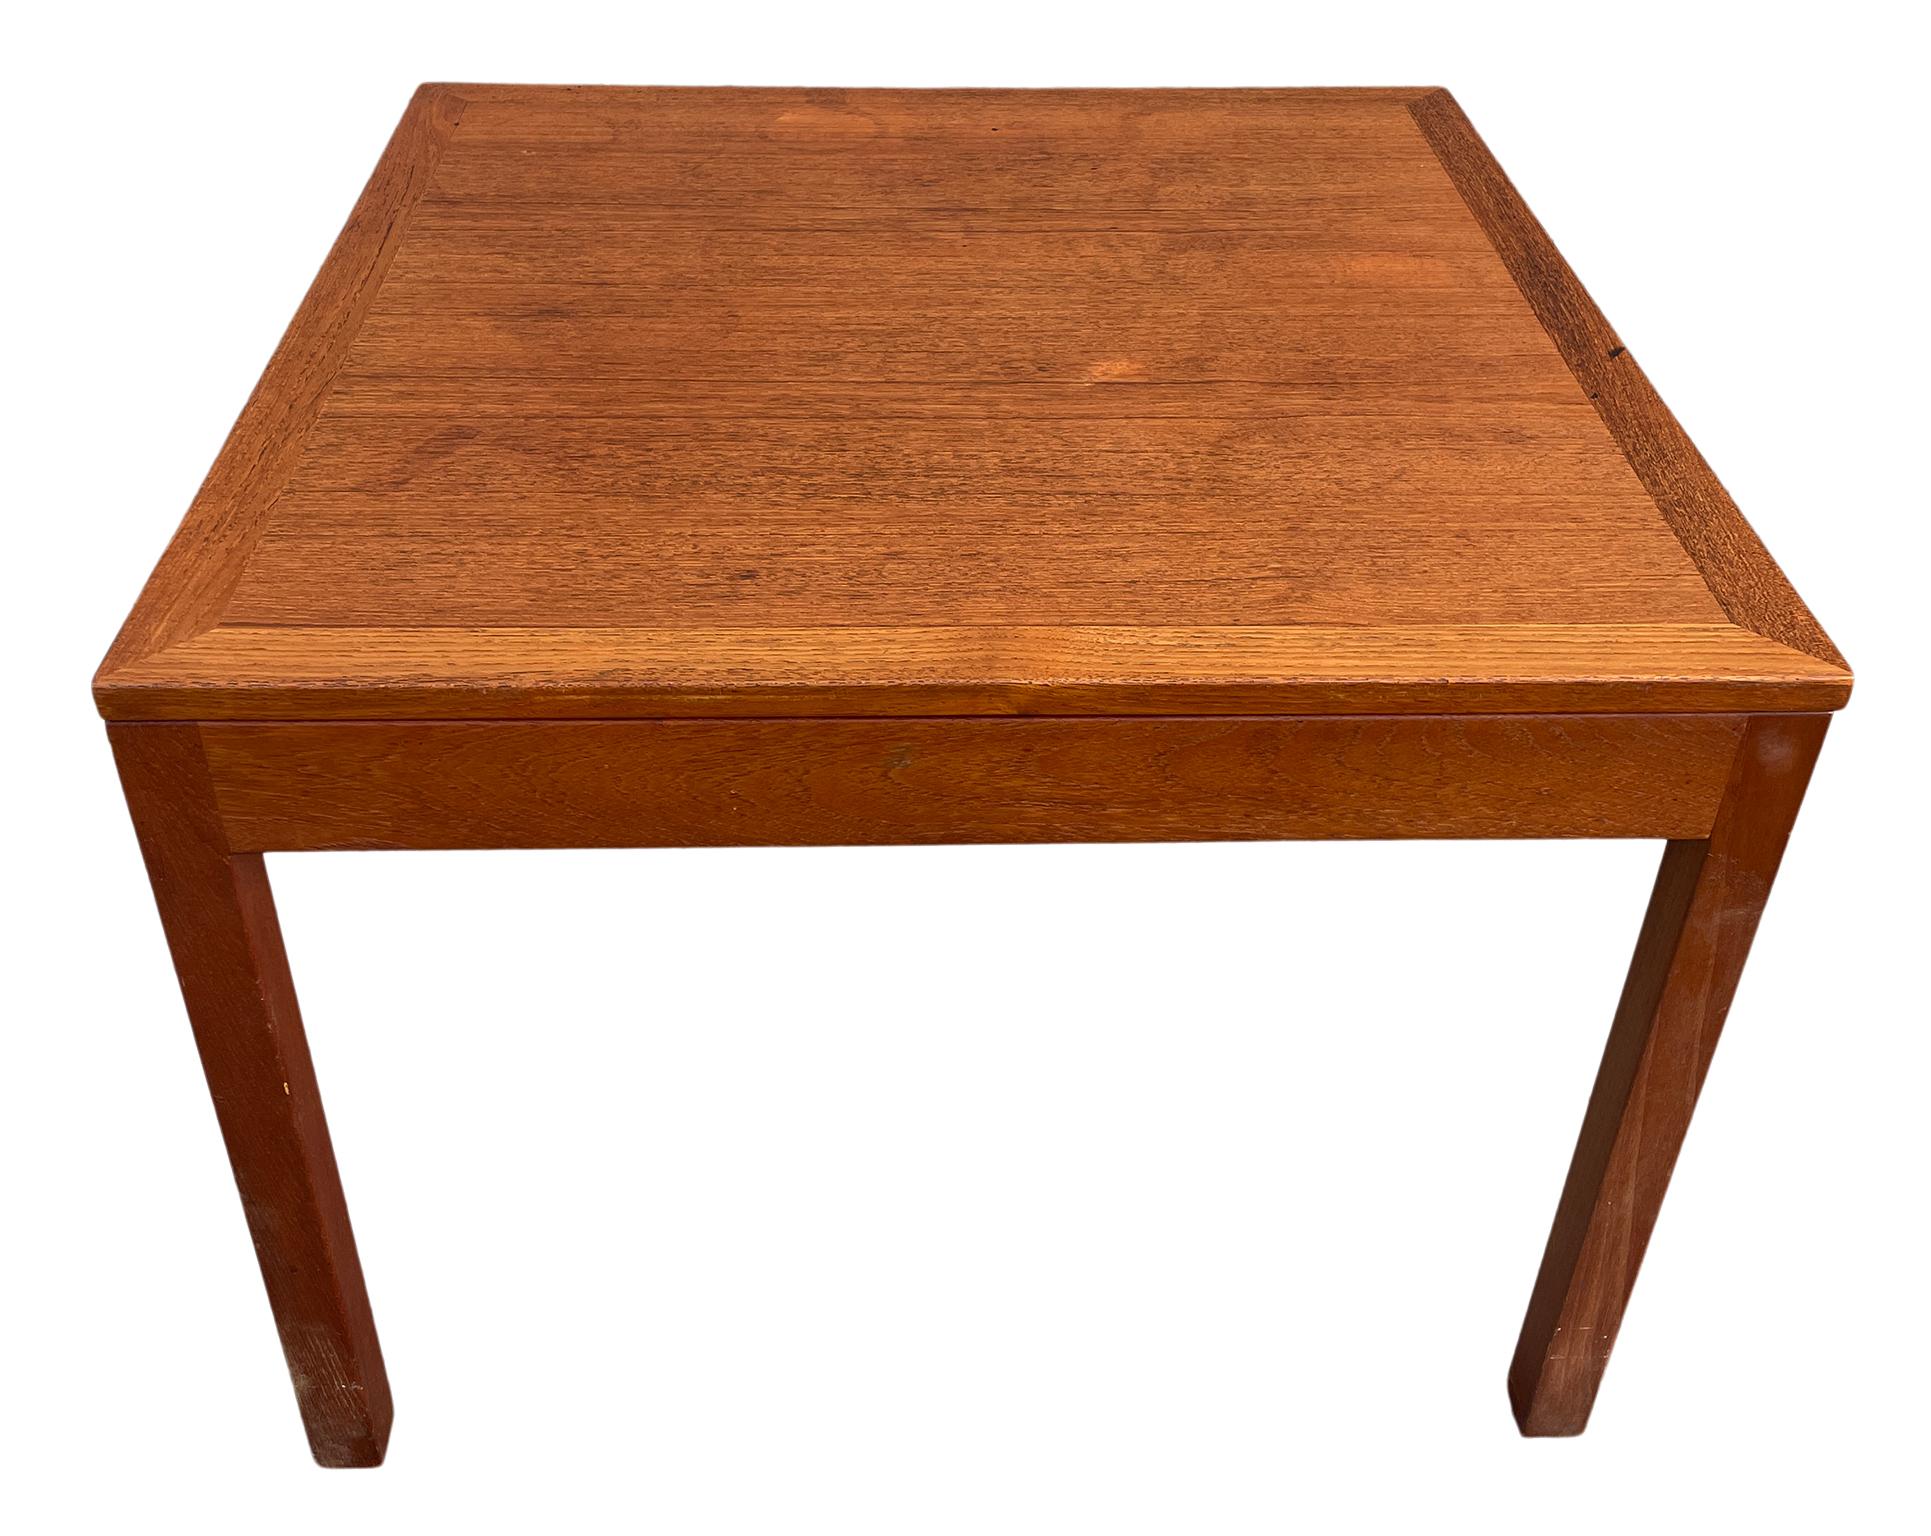 Mid-Century Modern square Danish coffee table by Børge Mogensen. Labeled. Great vintage condition. Located in Brooklyn NYC.

Model #377B
Danish control 
Frederica Stolefabrik.